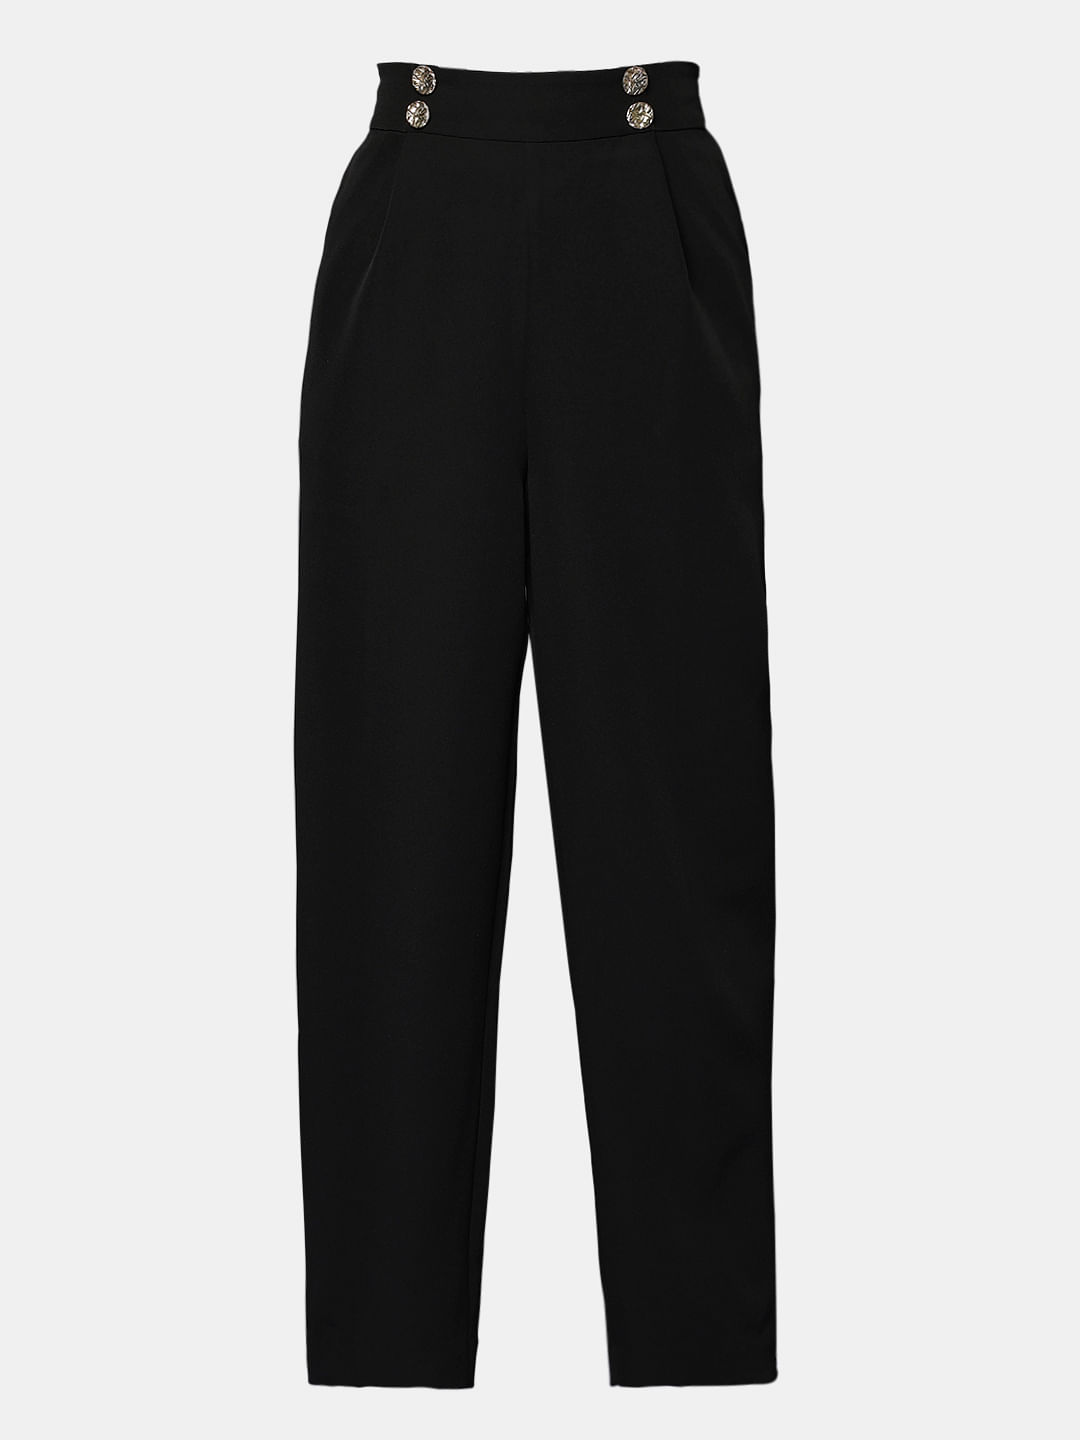 Creole Peg Cotton Twill Trousers Black | YMC | You Must Create